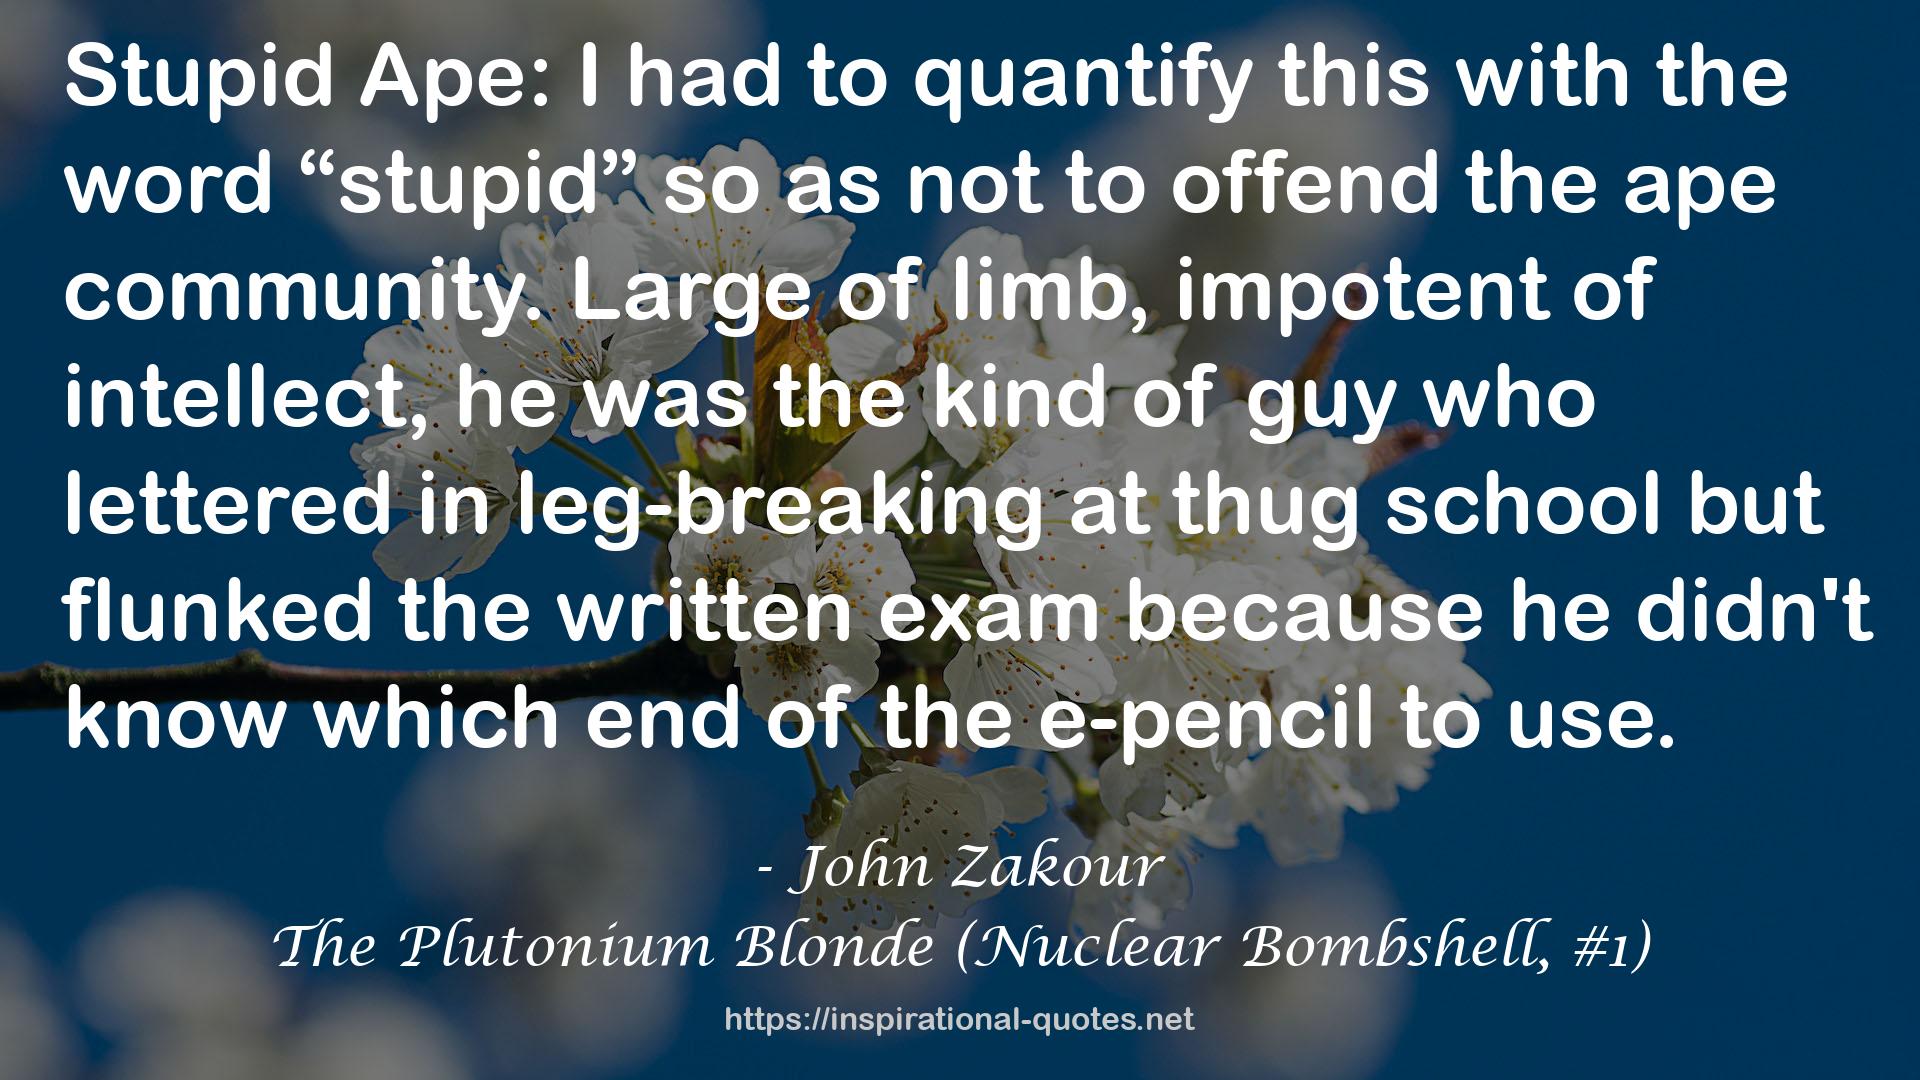 The Plutonium Blonde (Nuclear Bombshell, #1) QUOTES